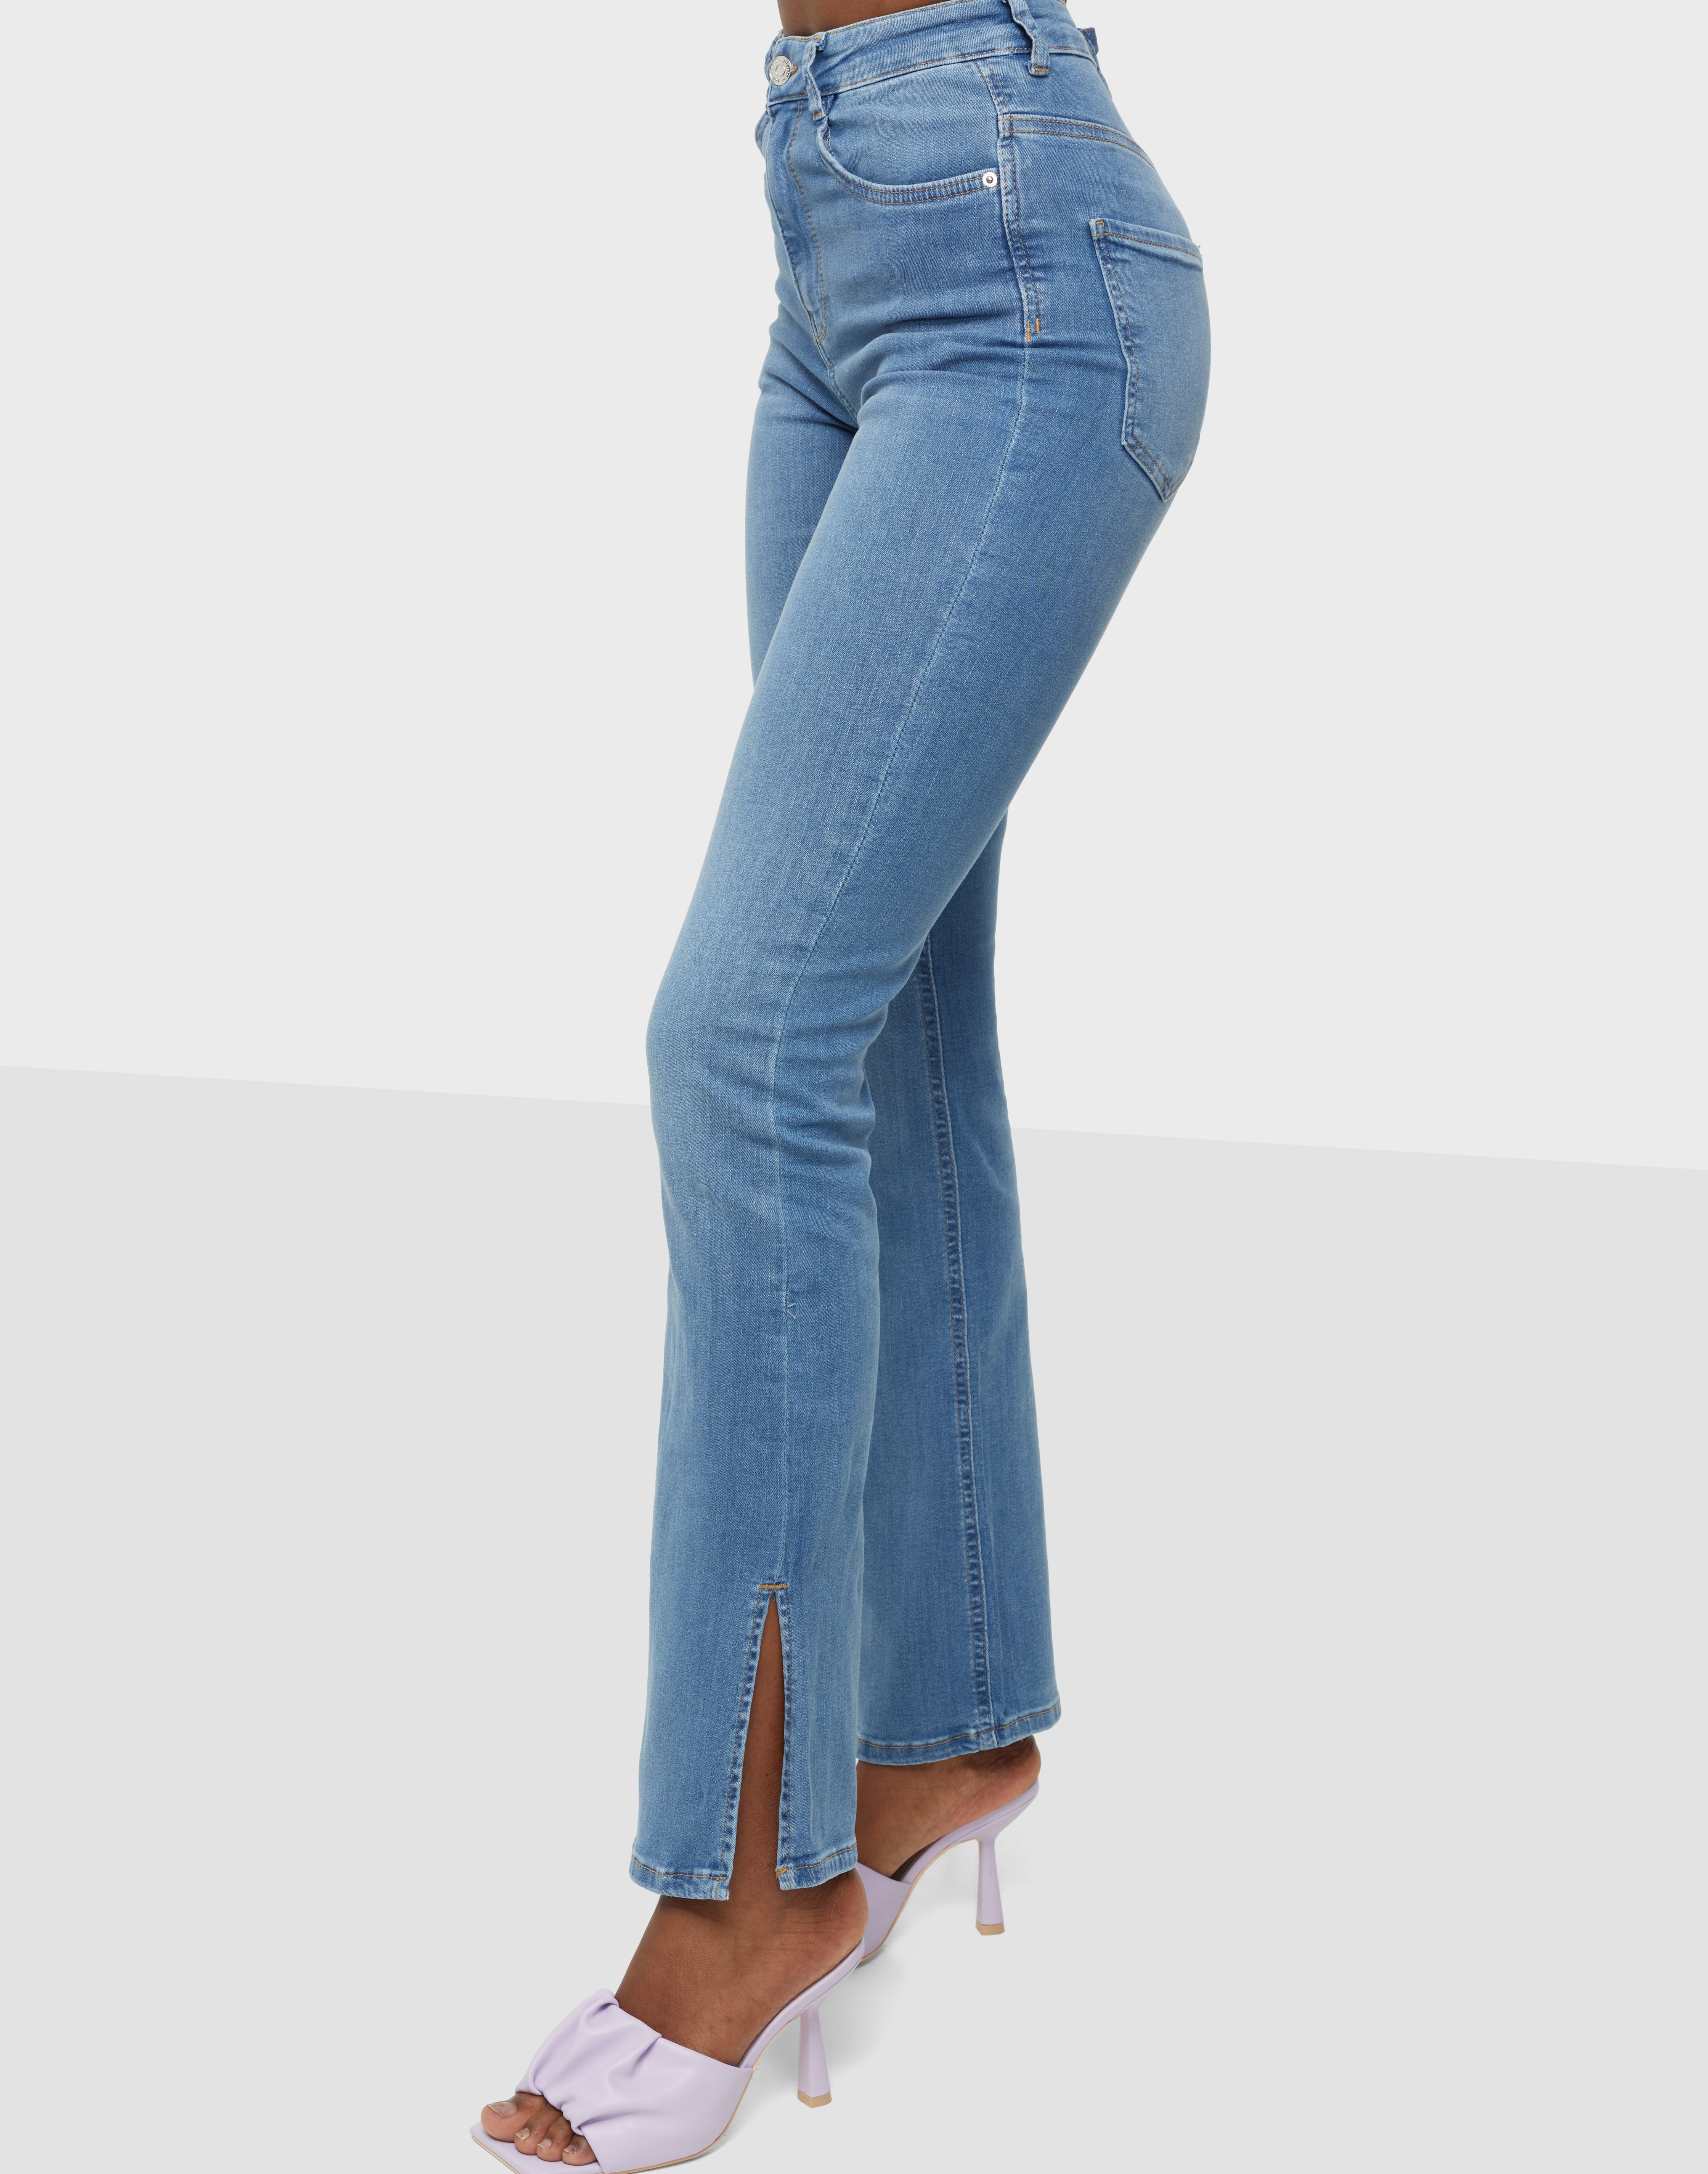 Shop Gina Tricot Molly slit jeans Mid Blue Nelly.com